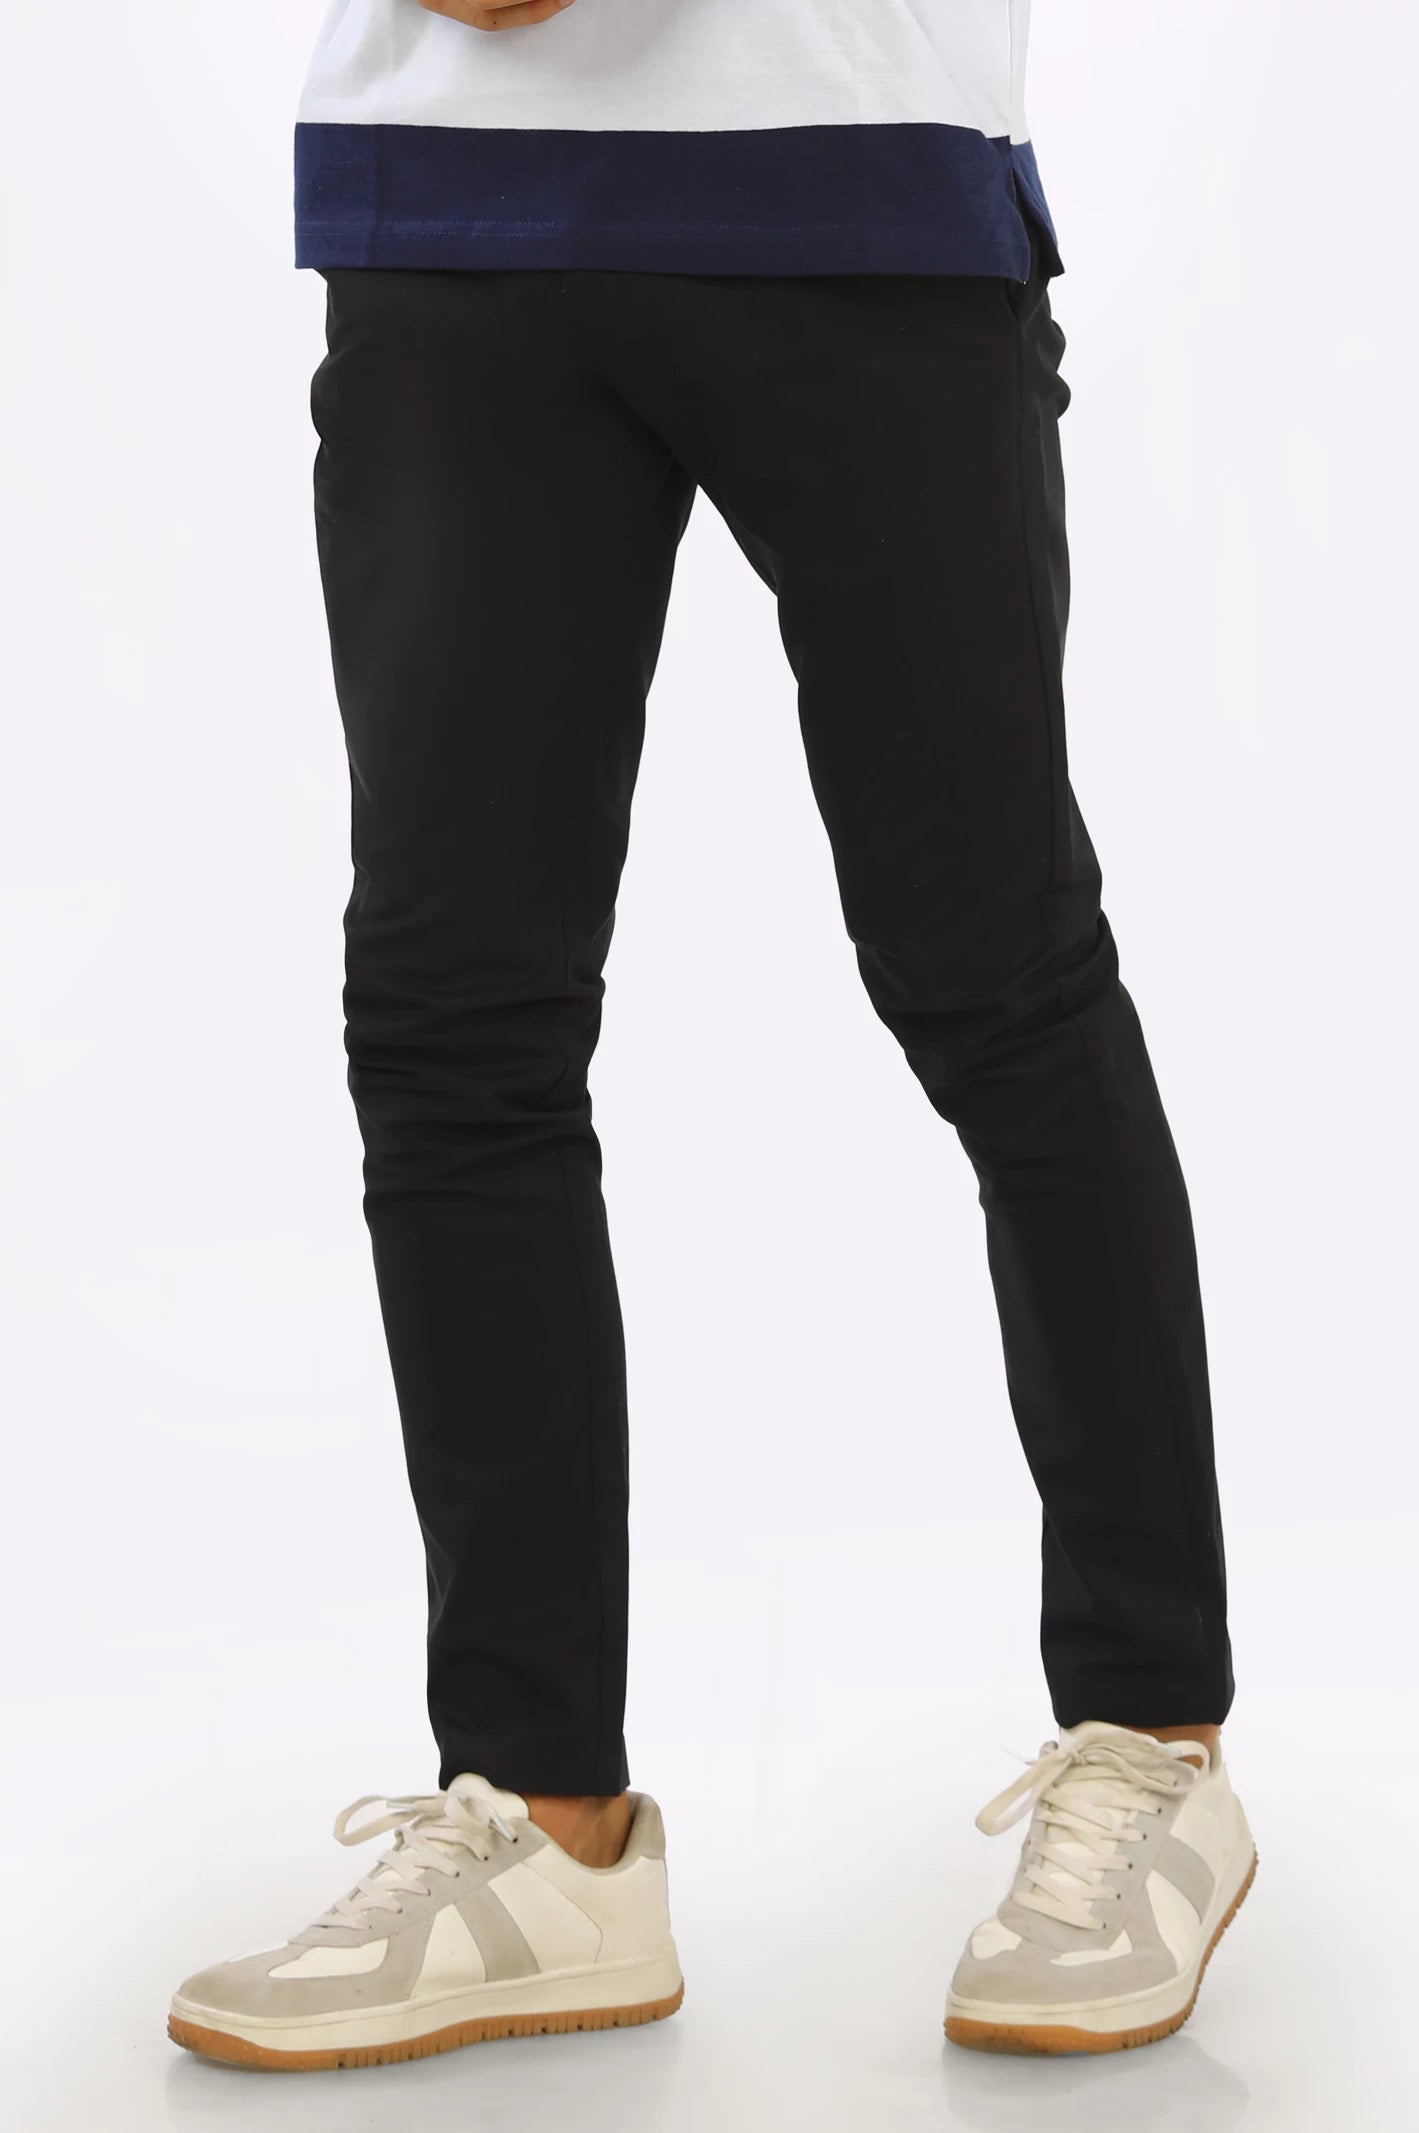 Black Casual Cotton Trouser From Diners